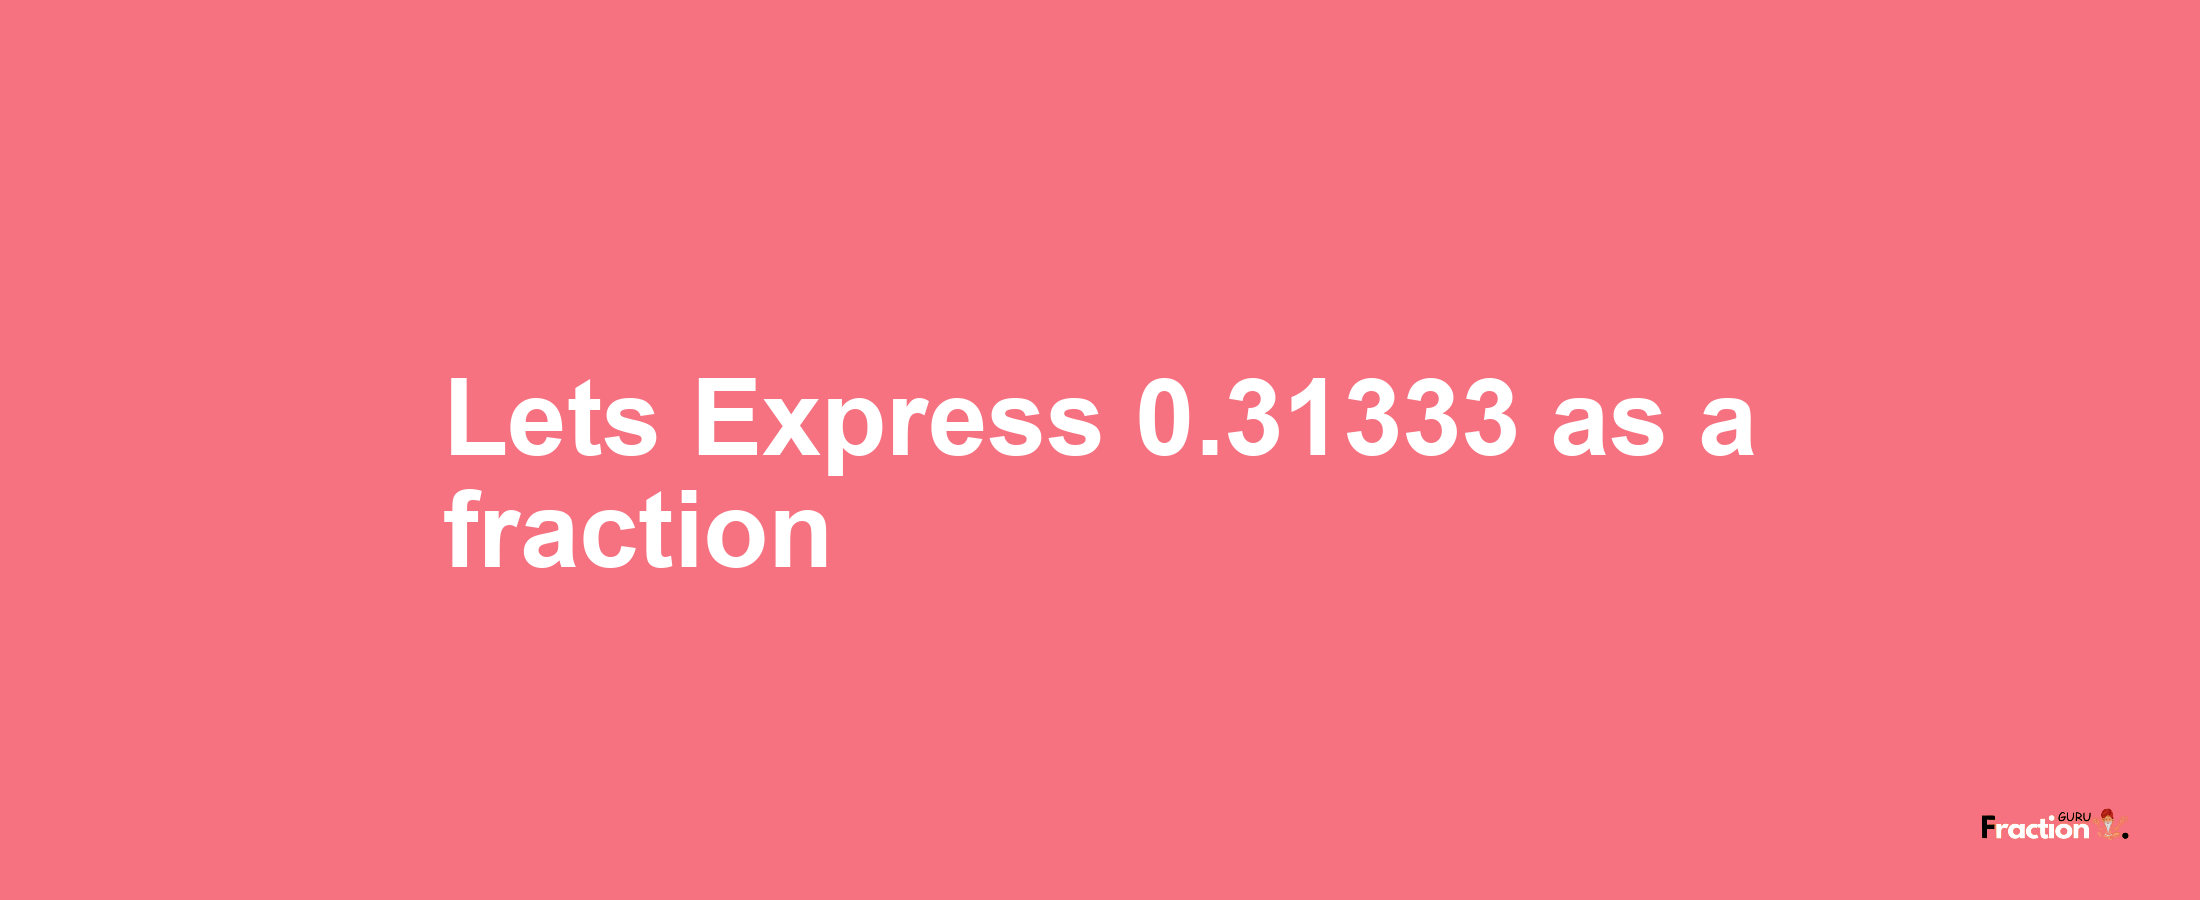 Lets Express 0.31333 as afraction